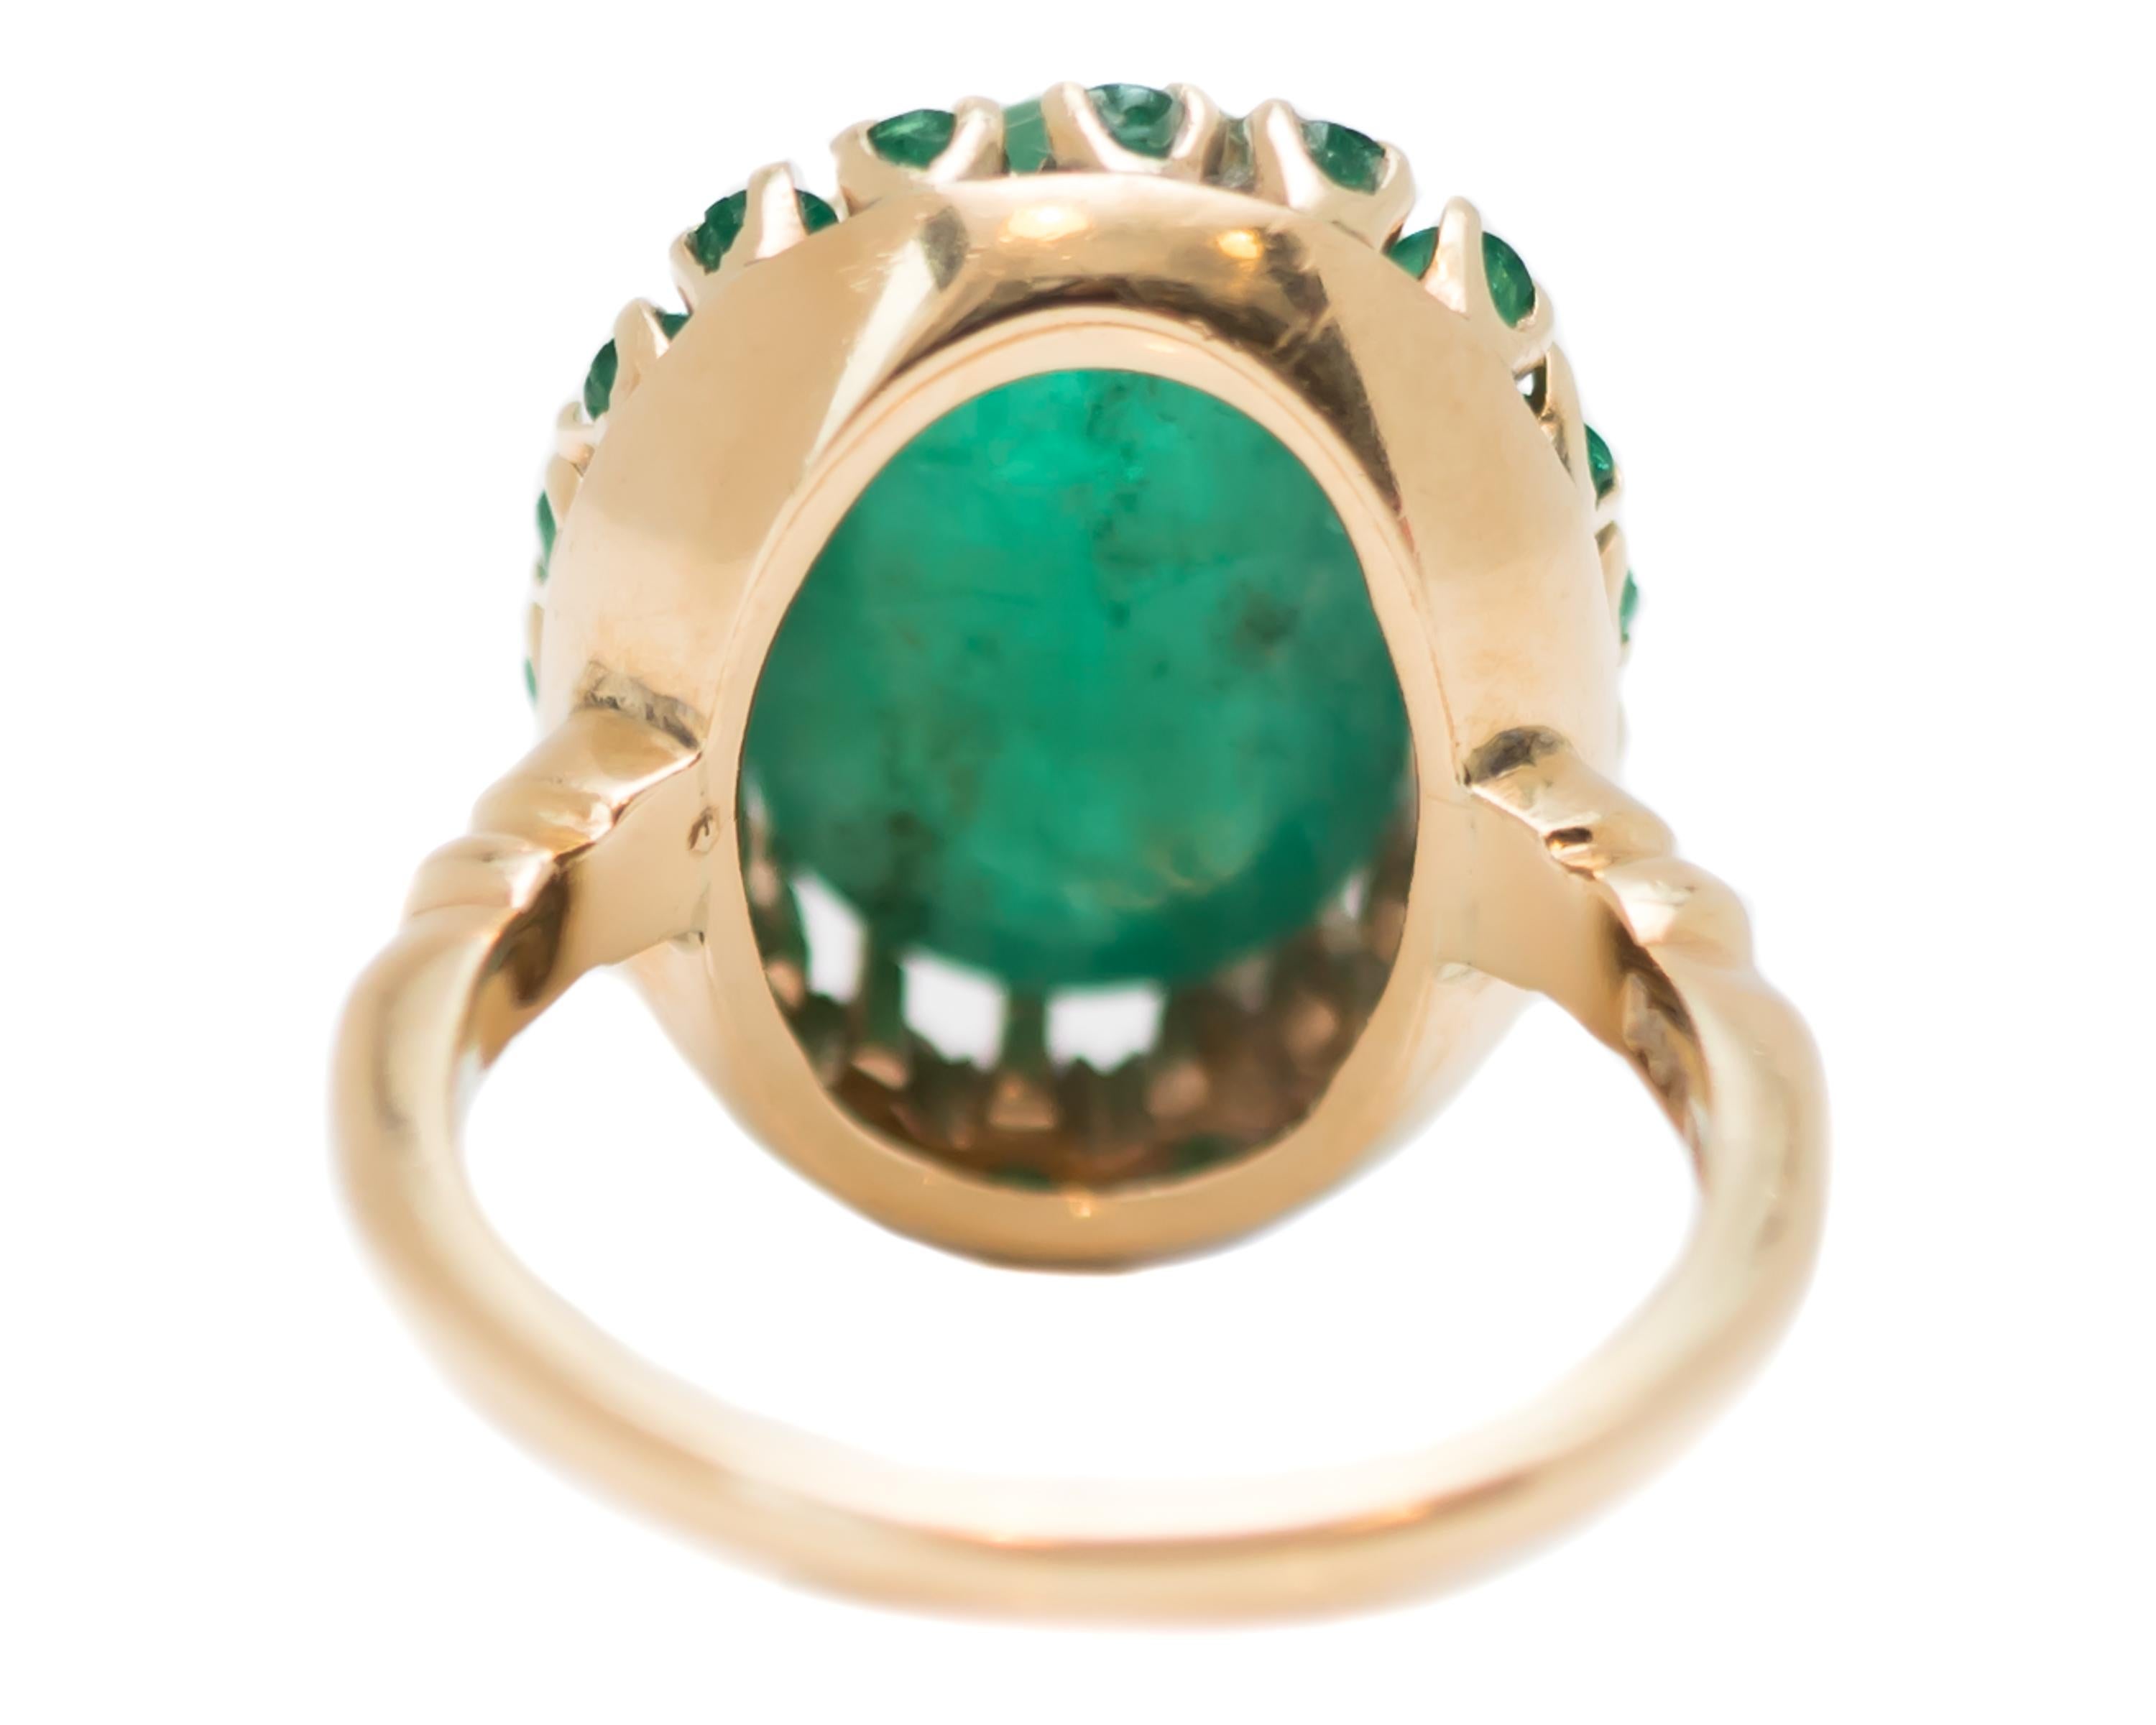 Retro 1960s 5 Carat Total Emerald Cabochon with Halo Ring in 14 Karat Yellow Gold